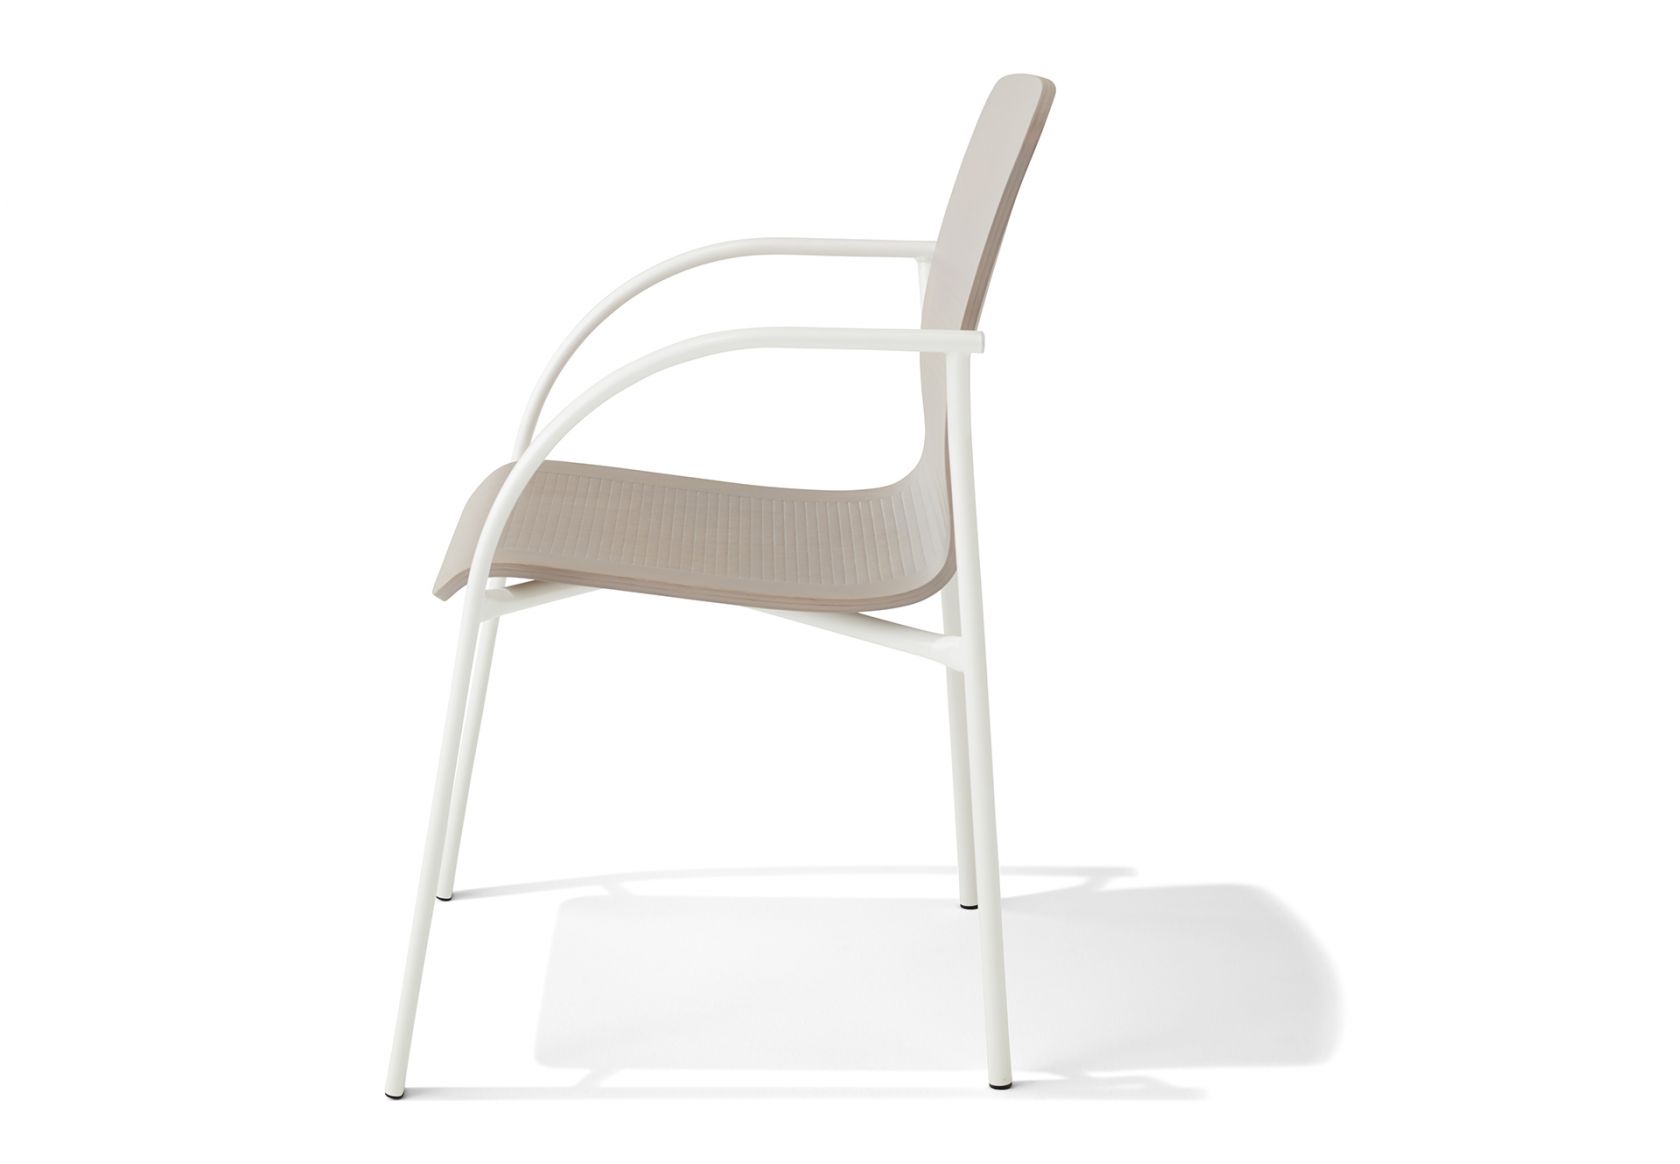 Plaza Chair Timber Arms